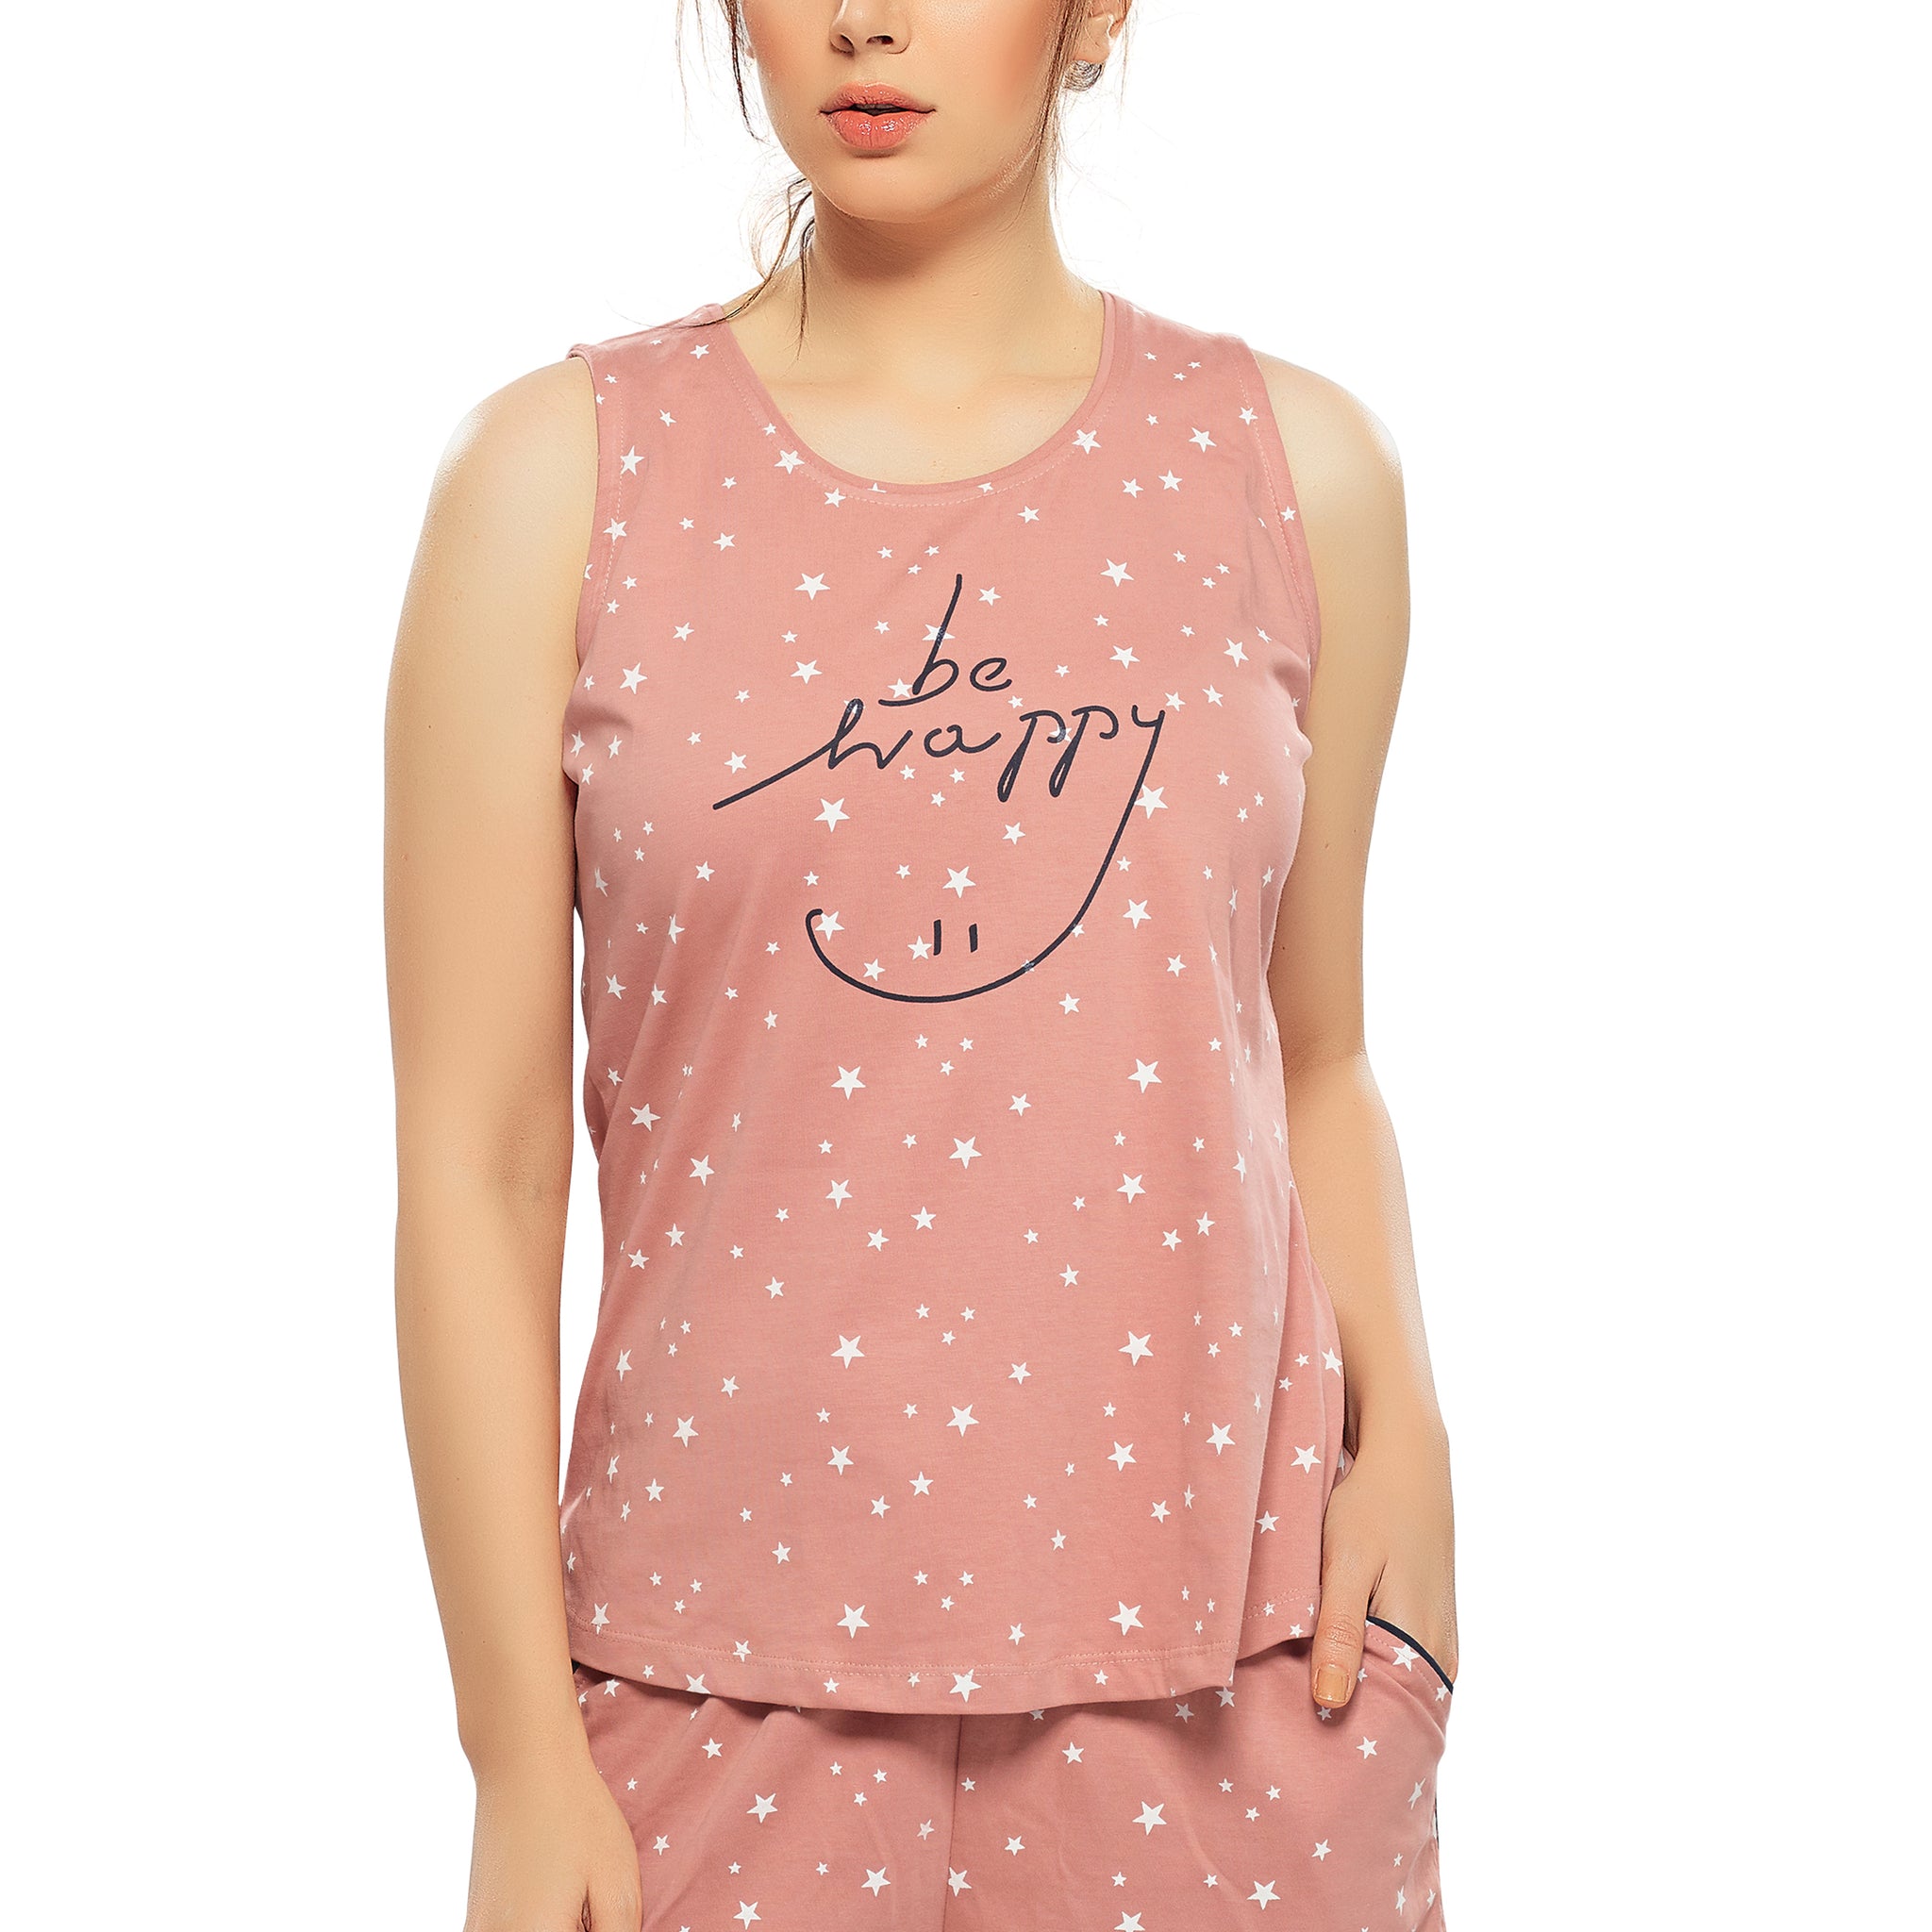 Pink Cotton Star Printed Sleeveless Crop Tops For Women